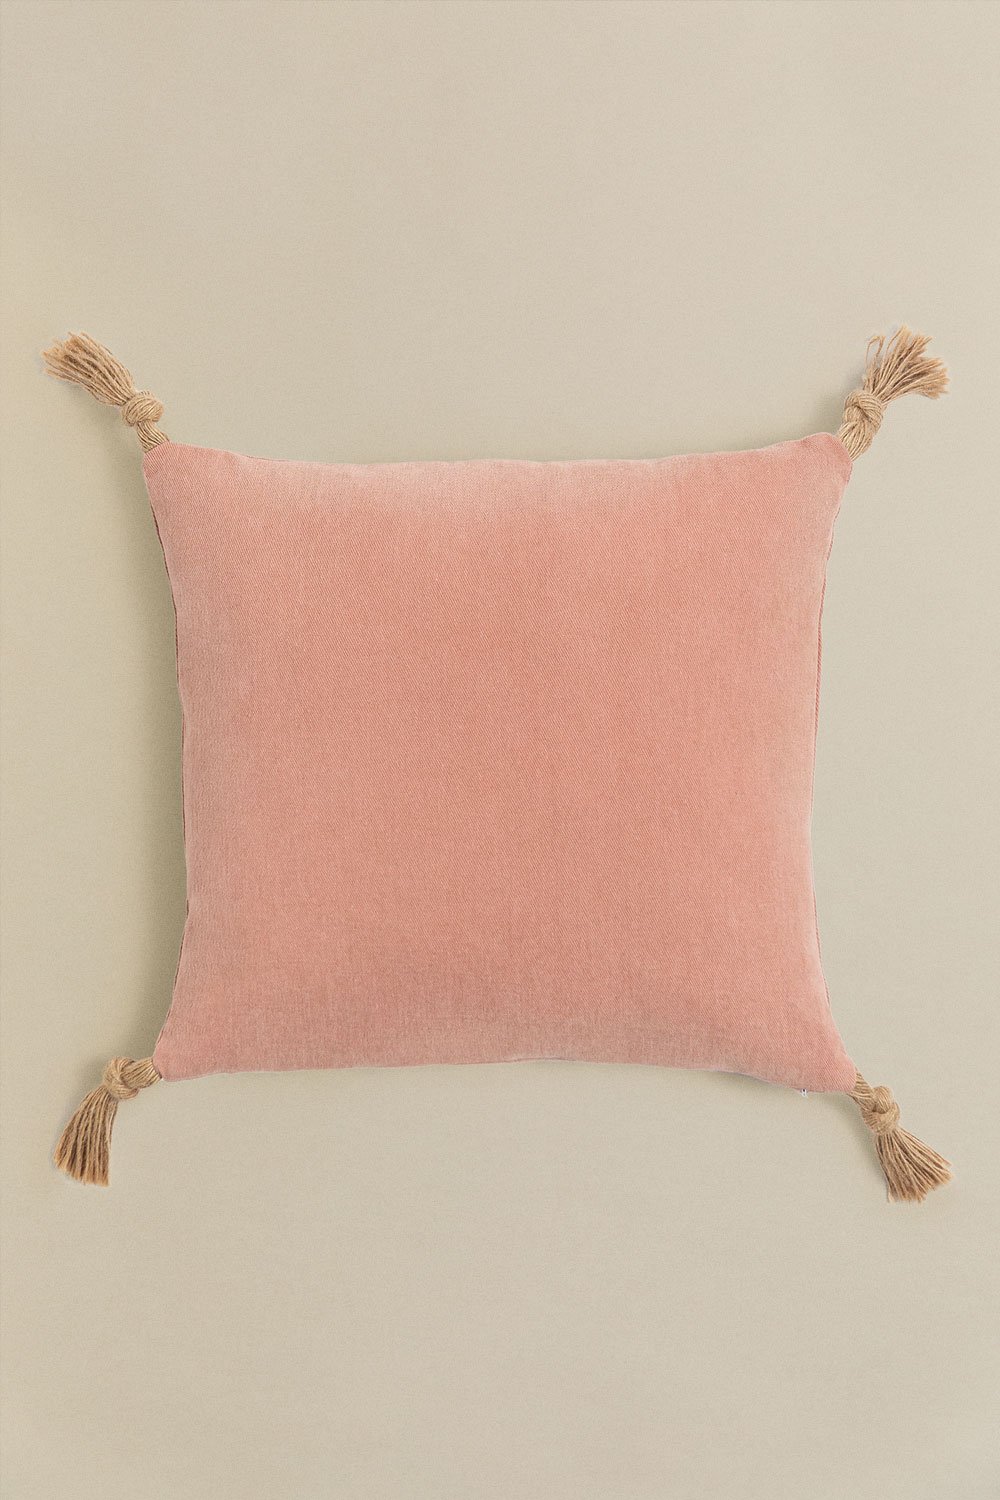 Square Cotton Cushion Musk Style (45x45 cm) , gallery image 1